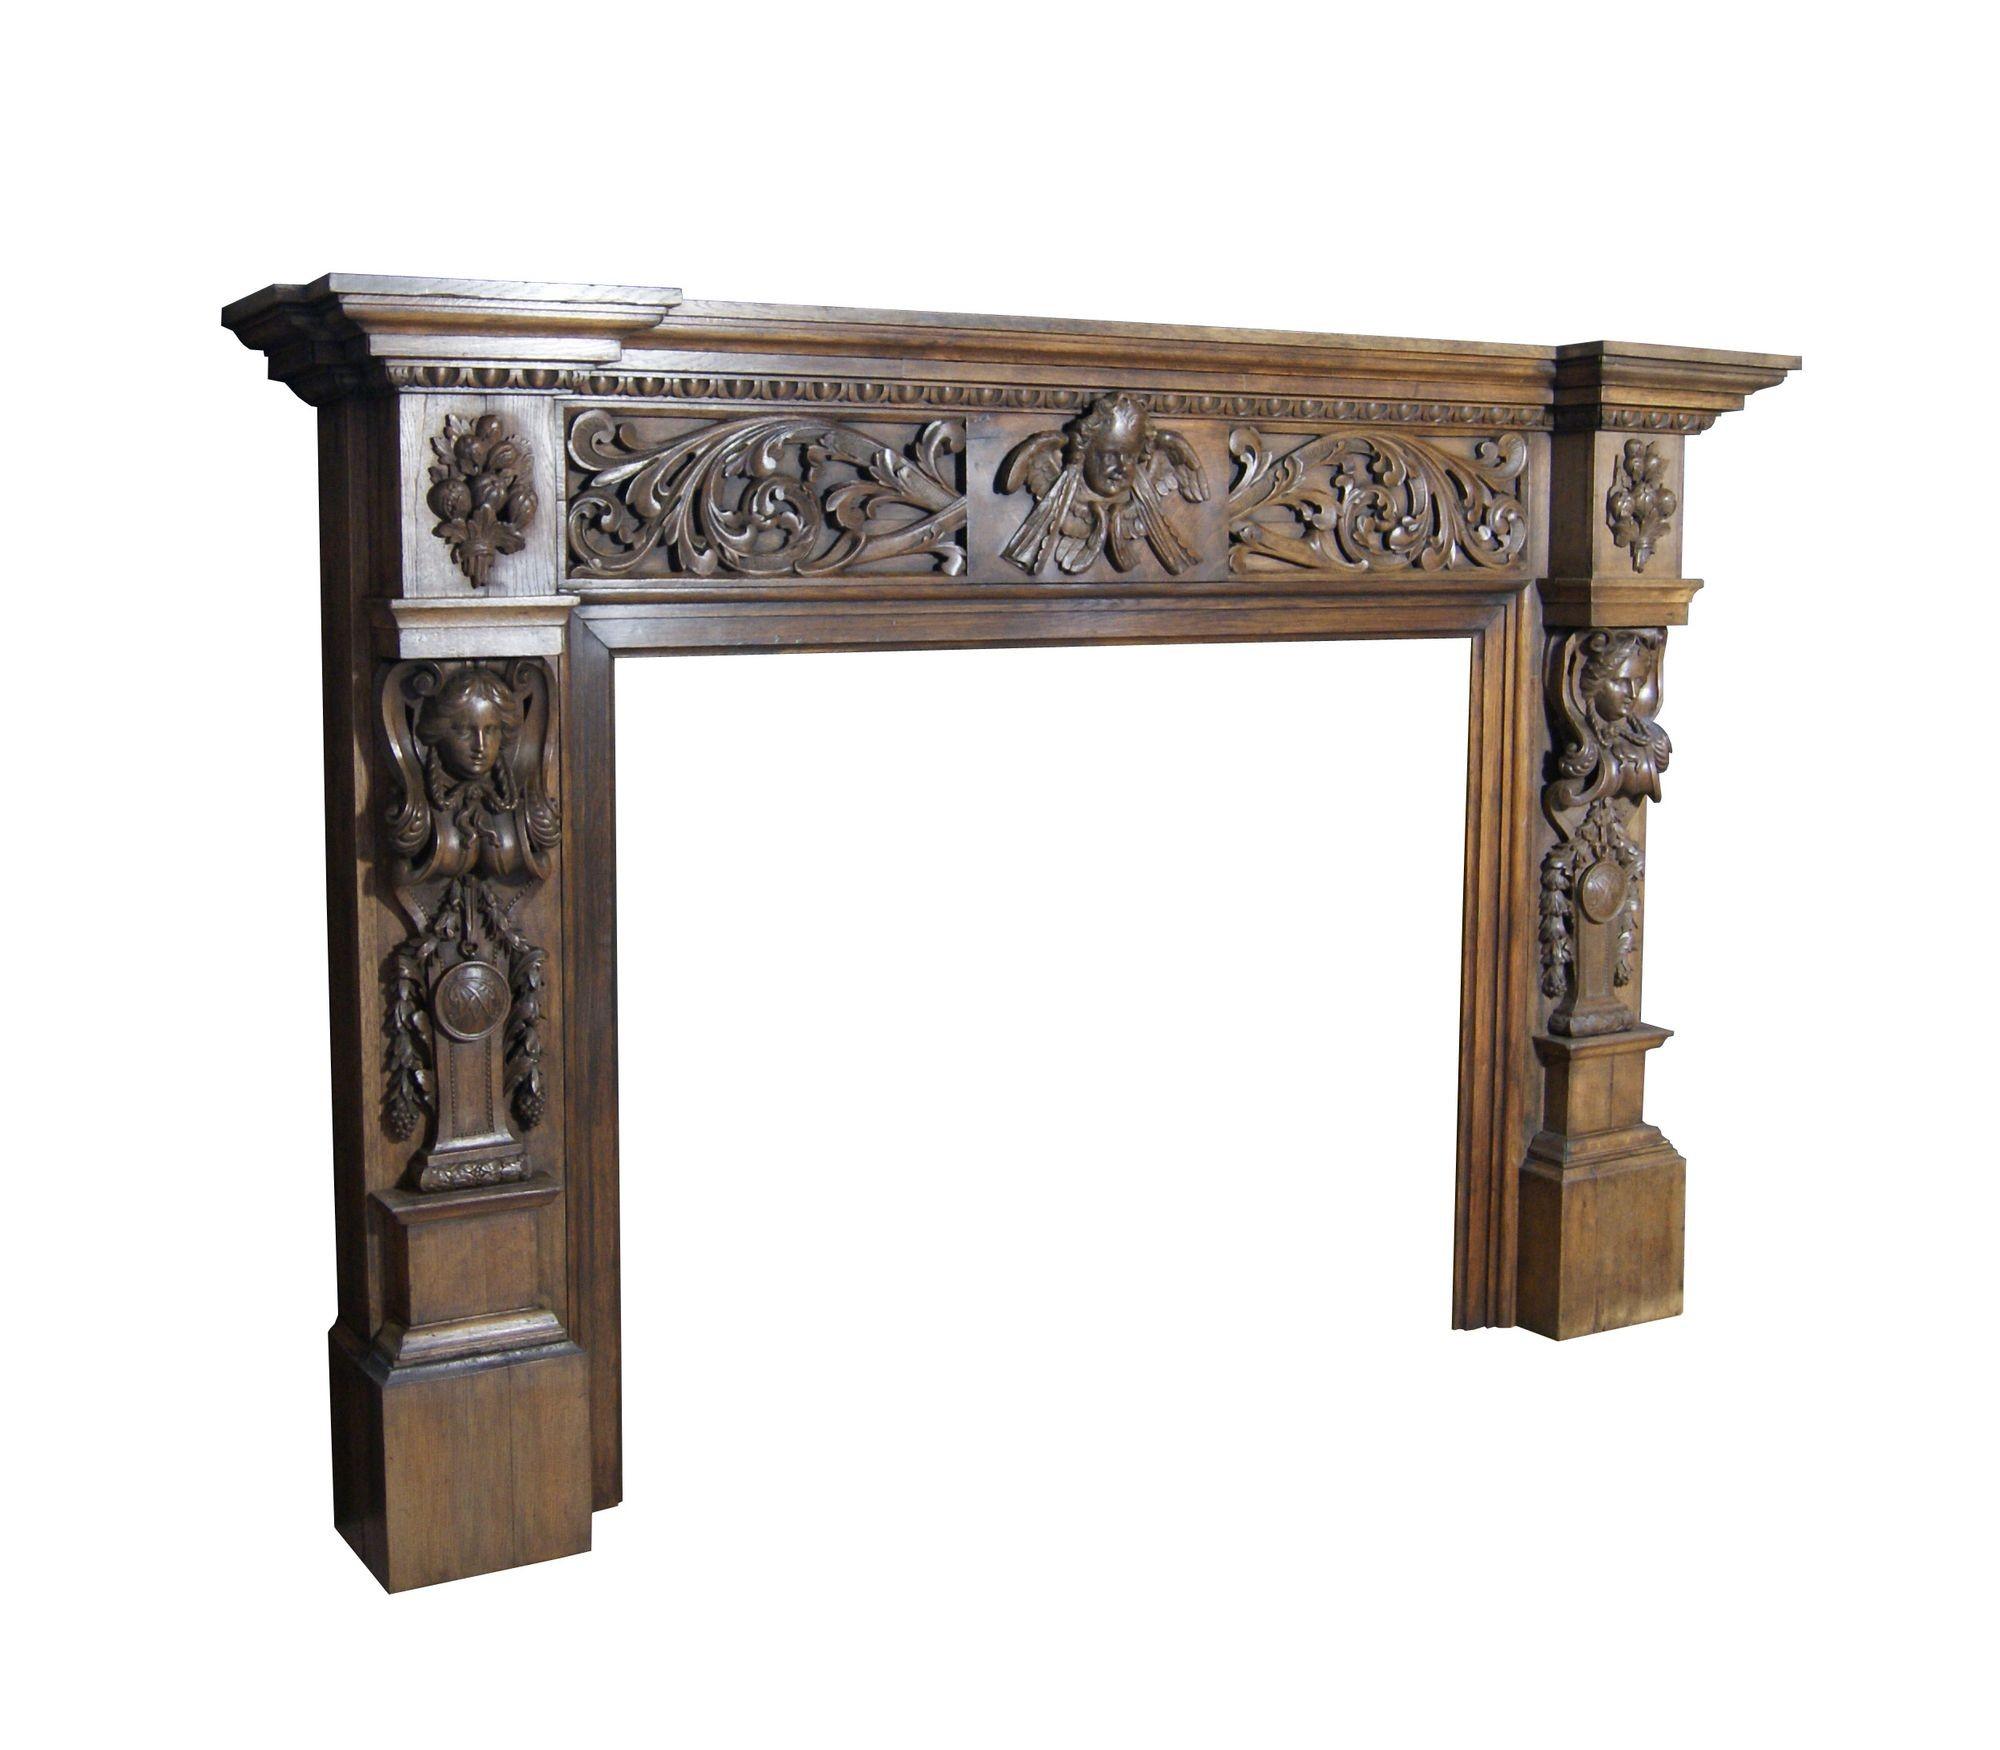 Jacobean A Large and Imposing English Antique Oak Fireplace Mantel For Sale